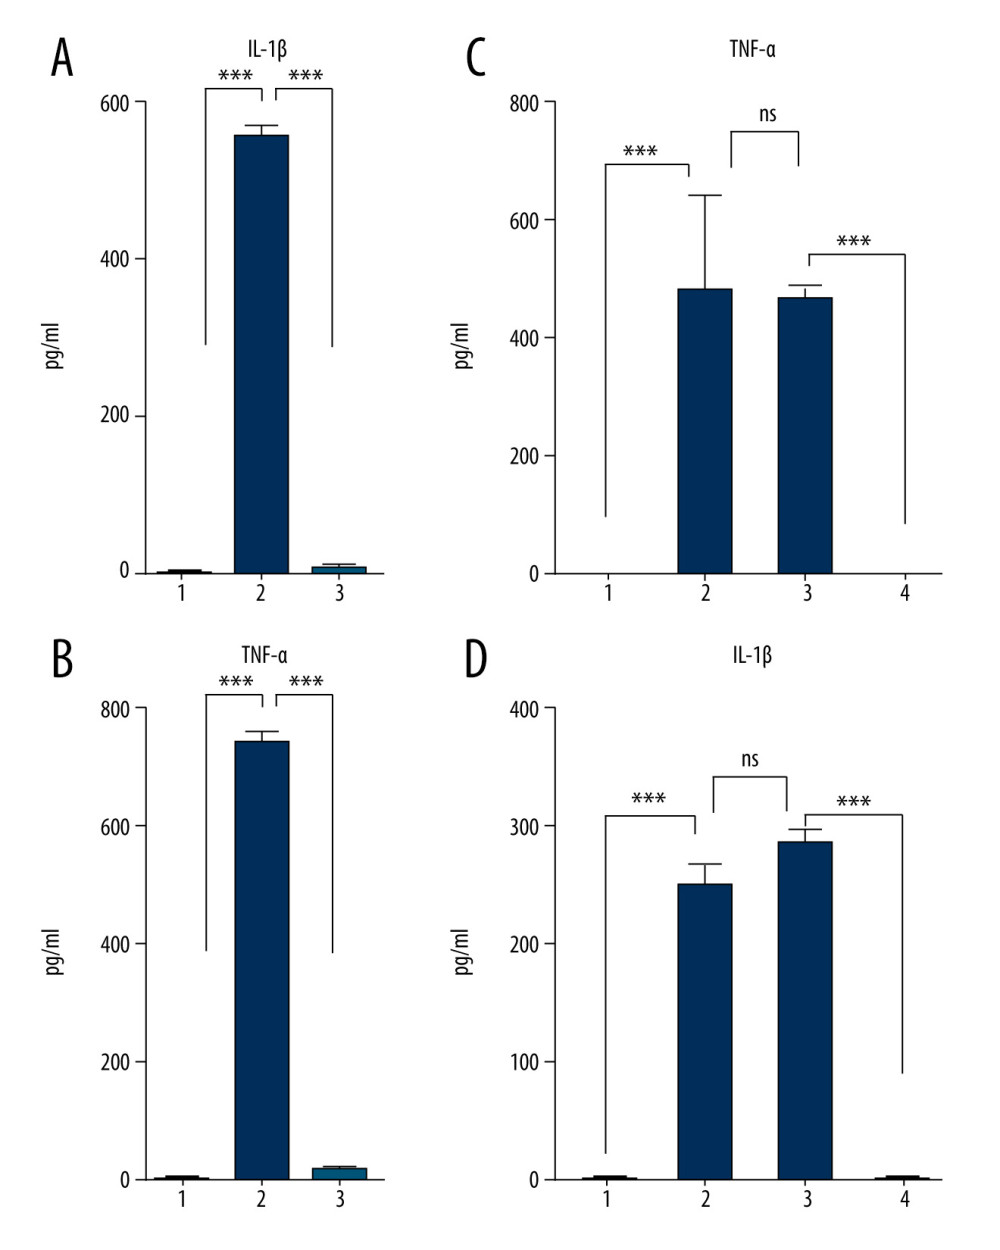 Sodium citrate (SC) prevents pro-inflammatory cytokine enrichment in a dose-dependent manner. Analysis of interleukin (IL)-1β (A) and tumor necrosis factor (TNF)-α (B) concentrations in human blood samples before incubation (1) or after incubation at 37°C for 24 h in the presence of either saline (2) or 4% SC (3). Dose-dependent effects of SC concentration on IL-1β (C) and TNF-α (D) production. The concentration in human blood samples is shown before incubation (1), after incubation at 37°C for 24 h (2), after incubation with the SC 5-fold less than the working concentration (3), and after incubation with the SC at 4% working concentration (4). A 2-way analysis of variance (ANOVA) reveals a statistically significant decrease in IL-1β and TNF-α concentrations in 24-h incubated blood in the presence of SC in a dose-dependent manner, compared with the saline control (*** P<0.001; nonsignificant [ns], P>0.01). The figure was created using ImageJ software version 1.53e; Java 1.8.0_172.